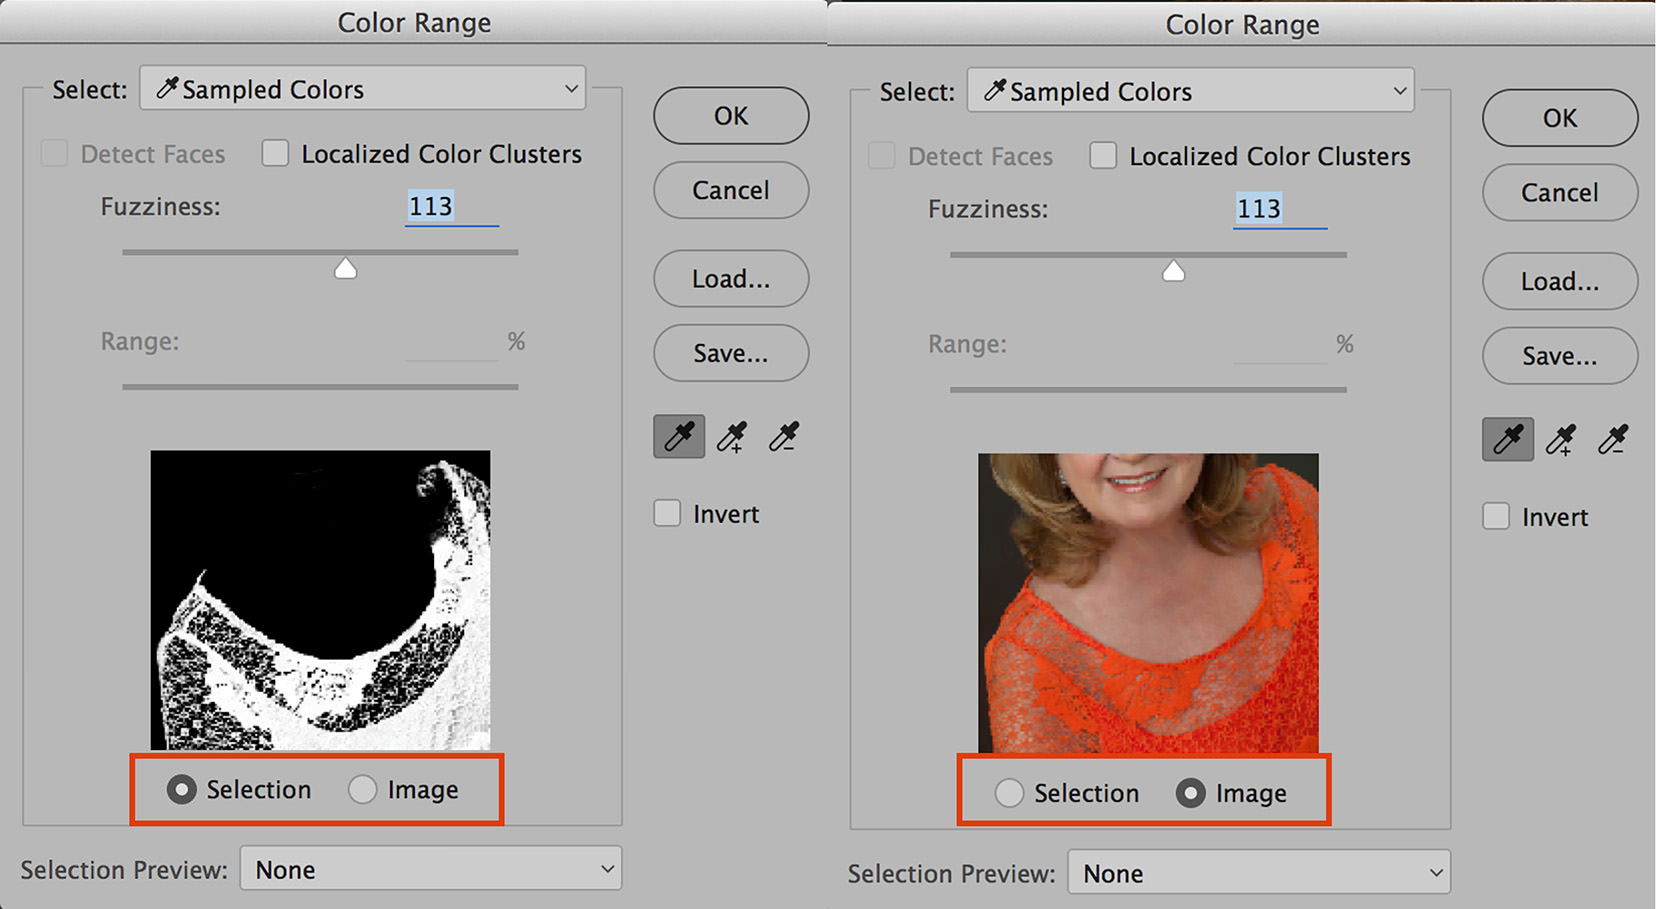 Selection and Image Views in the Color Range tool